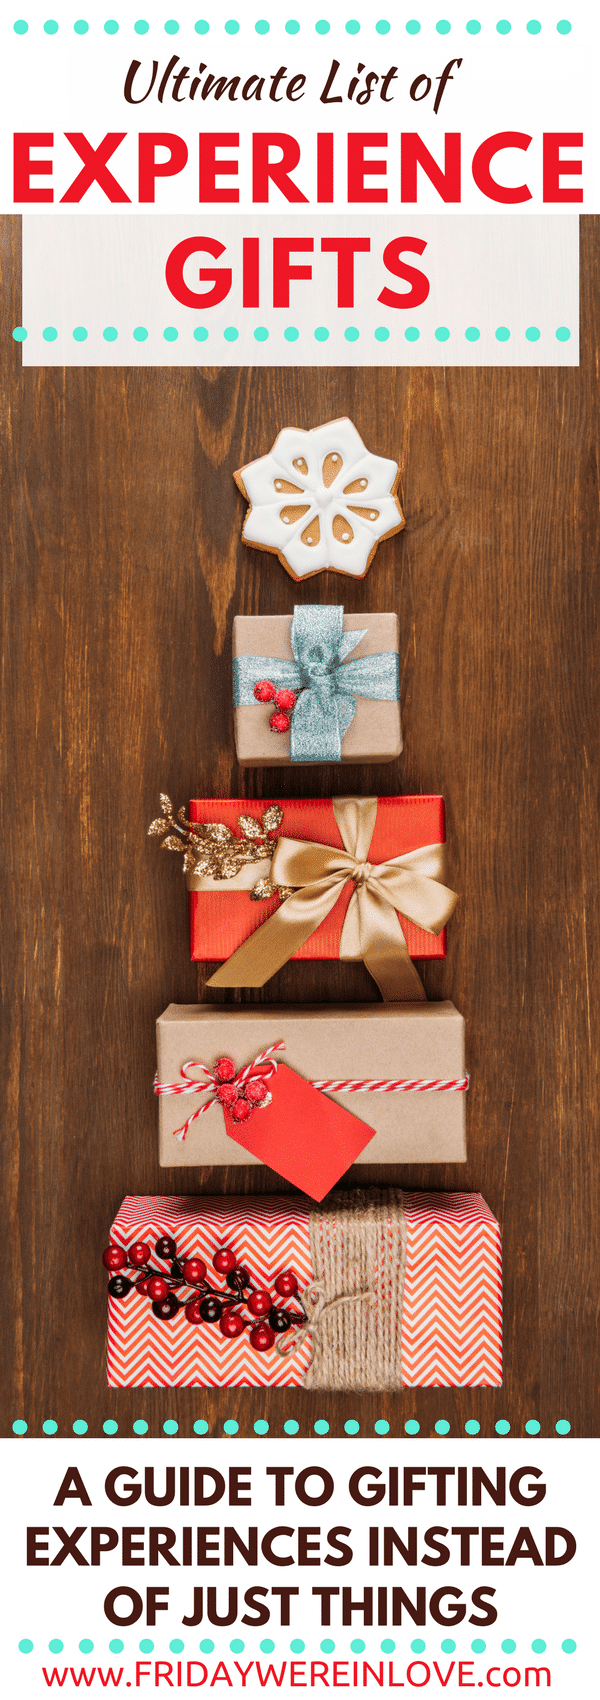 Gifting Experiences Instead of Just Things: Experience Gifts Ideas They Will Love!